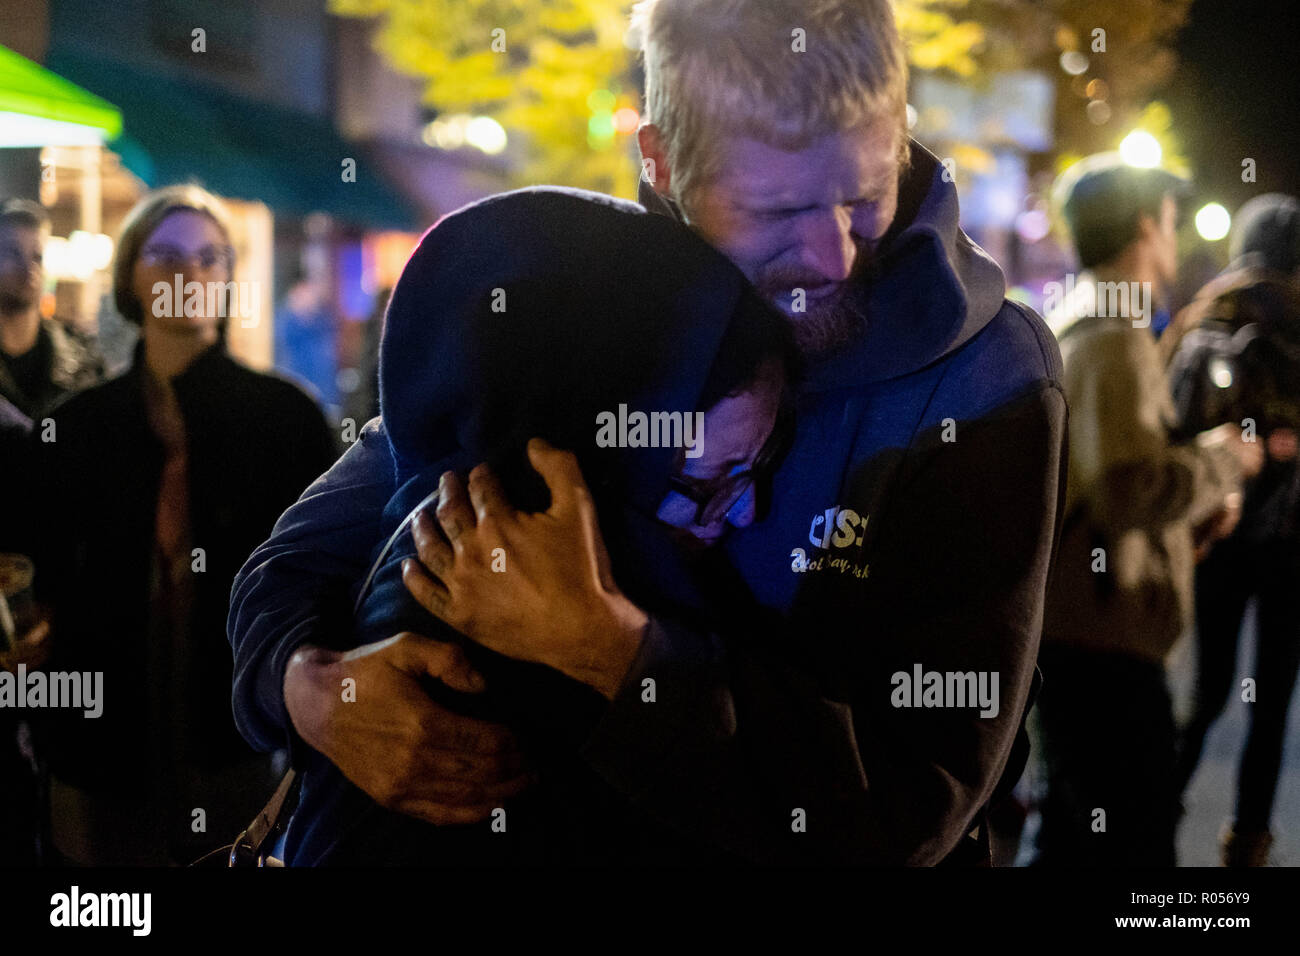 Pittsburgh, PA, USA. 30th Oct, 2018. Couple embraces during the If Not Now When demonstration.In the aftermath of the Tree of Life shootings in Pittsburgh, PA, the If Not Now When protest sits in the middle of the main street in squirrel Hill, police block off roads. Credit: Aaron Jackendoff/SOPA Images/ZUMA Wire/Alamy Live News Stock Photo